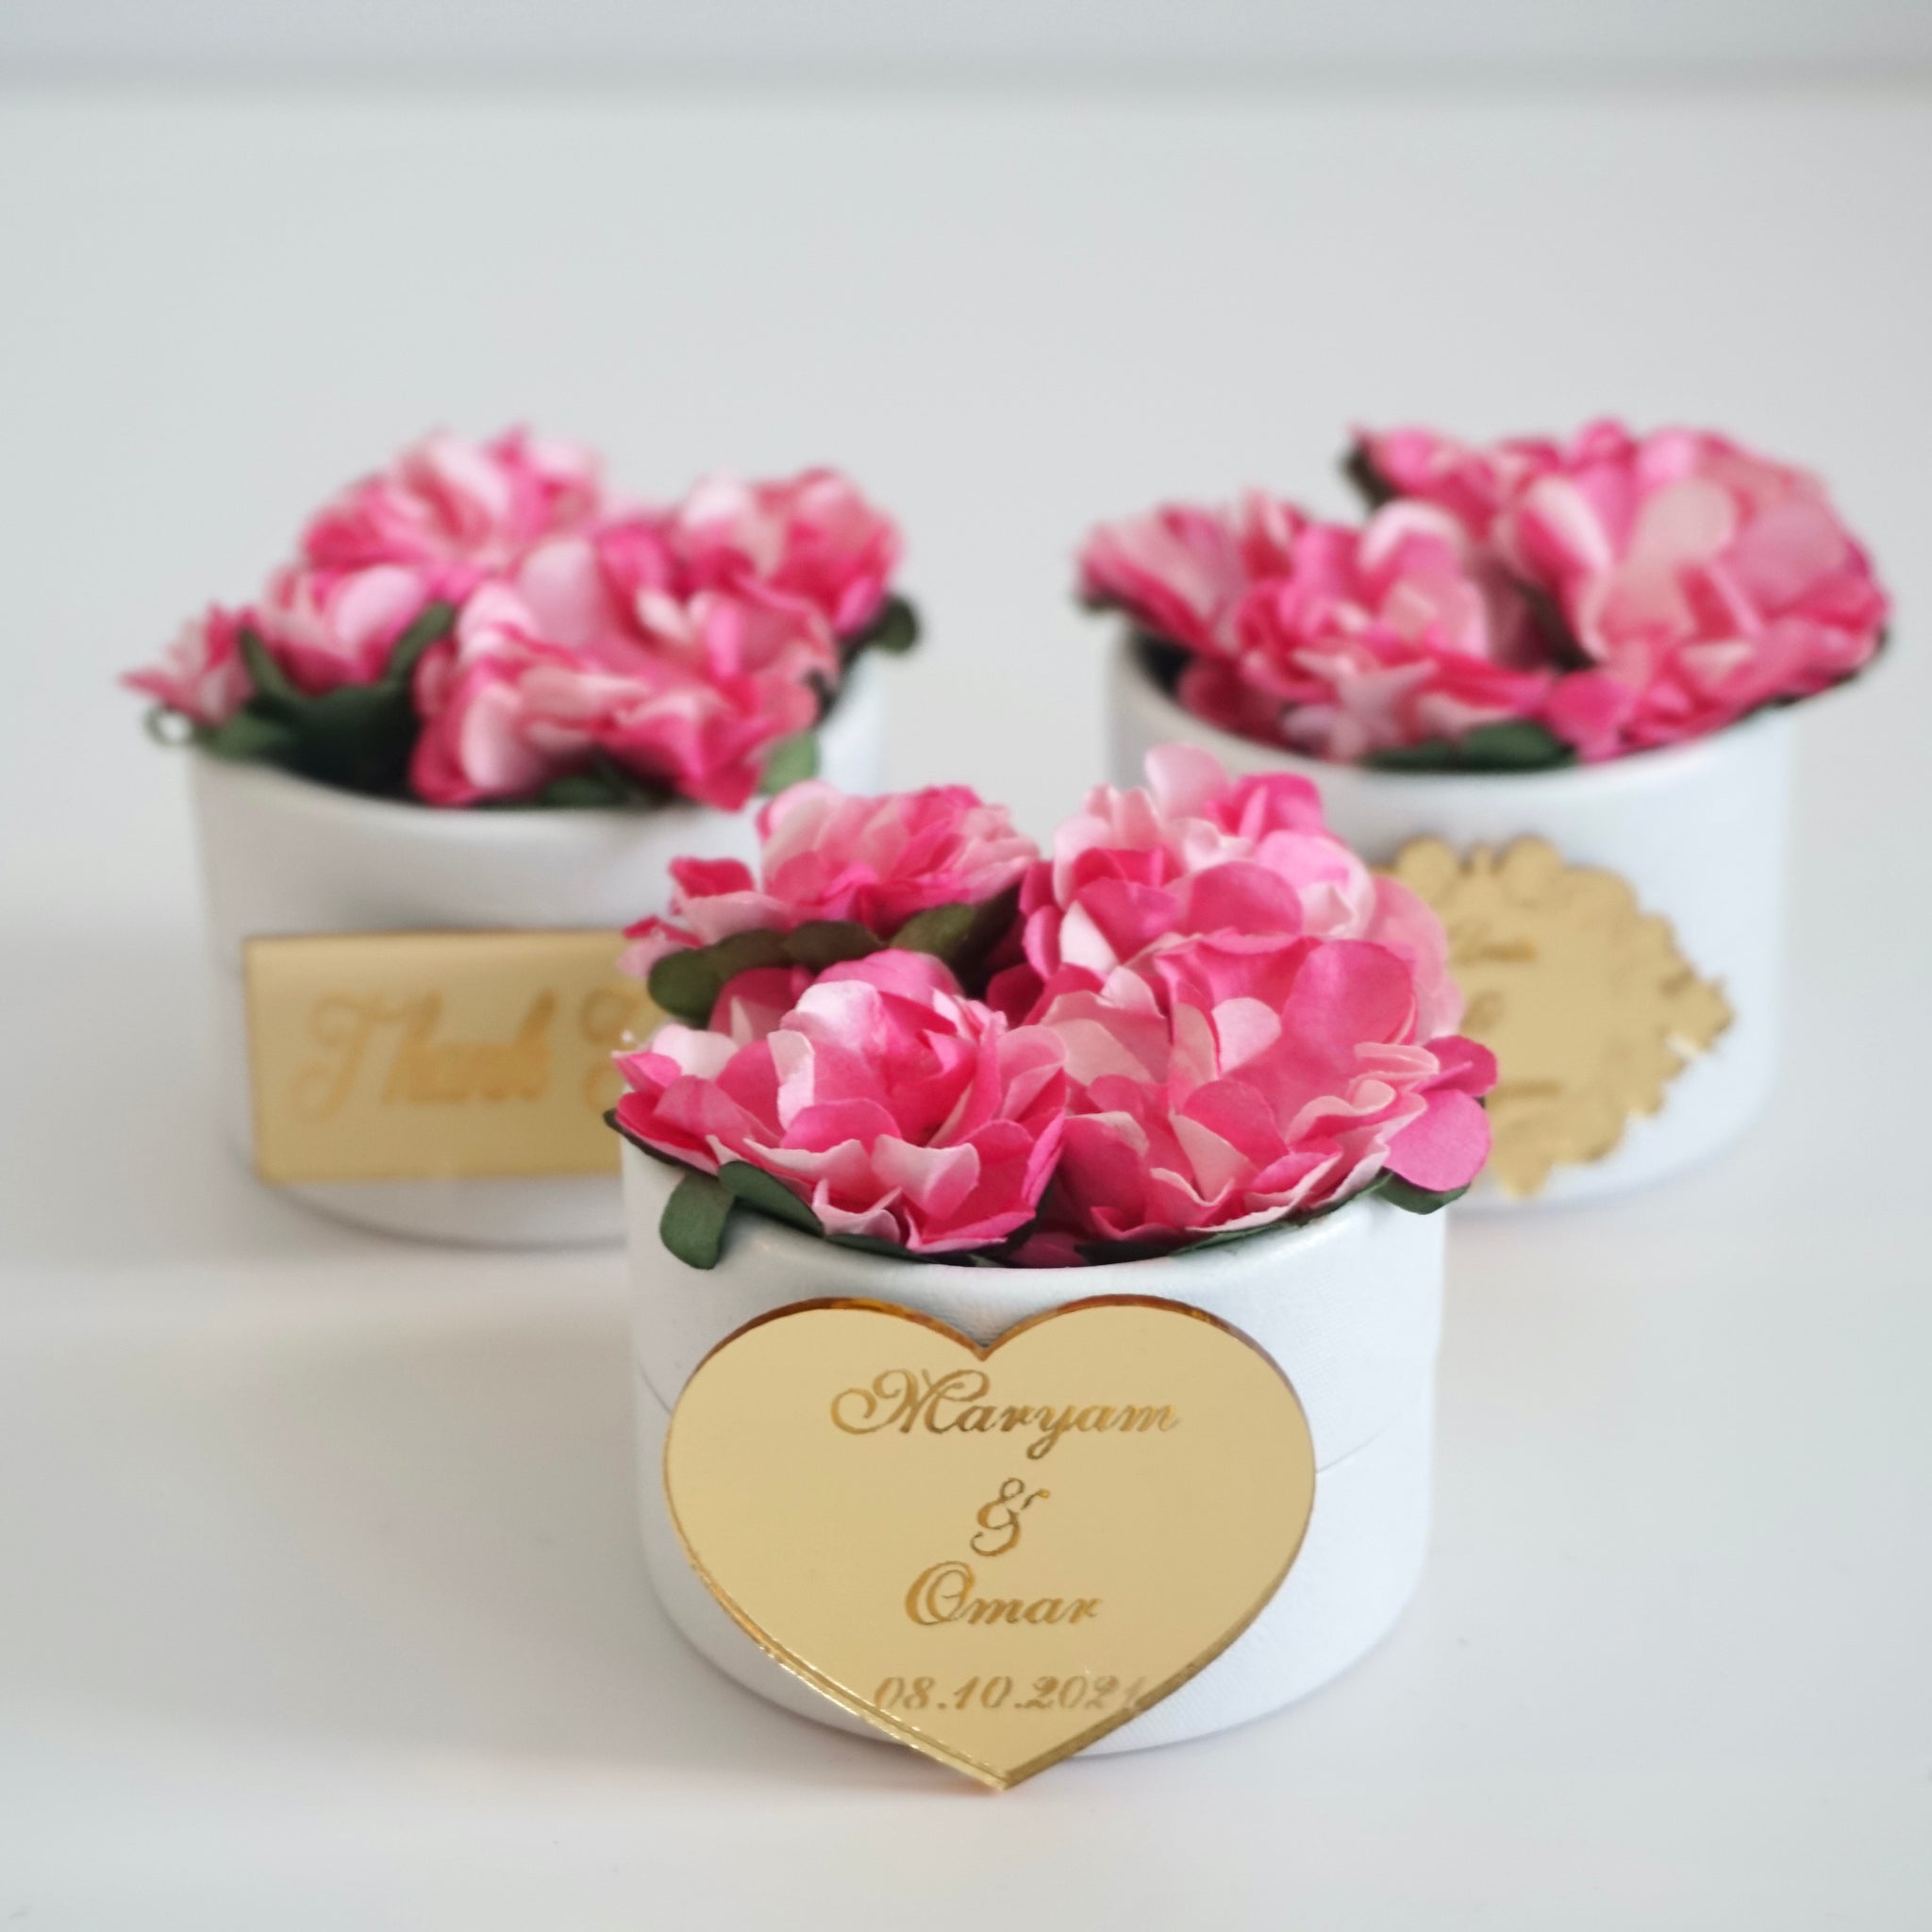 Personalized Candy Boxes with Pink Flowers - Ideal for Weddings, Bridal Showers, and Baby Showers